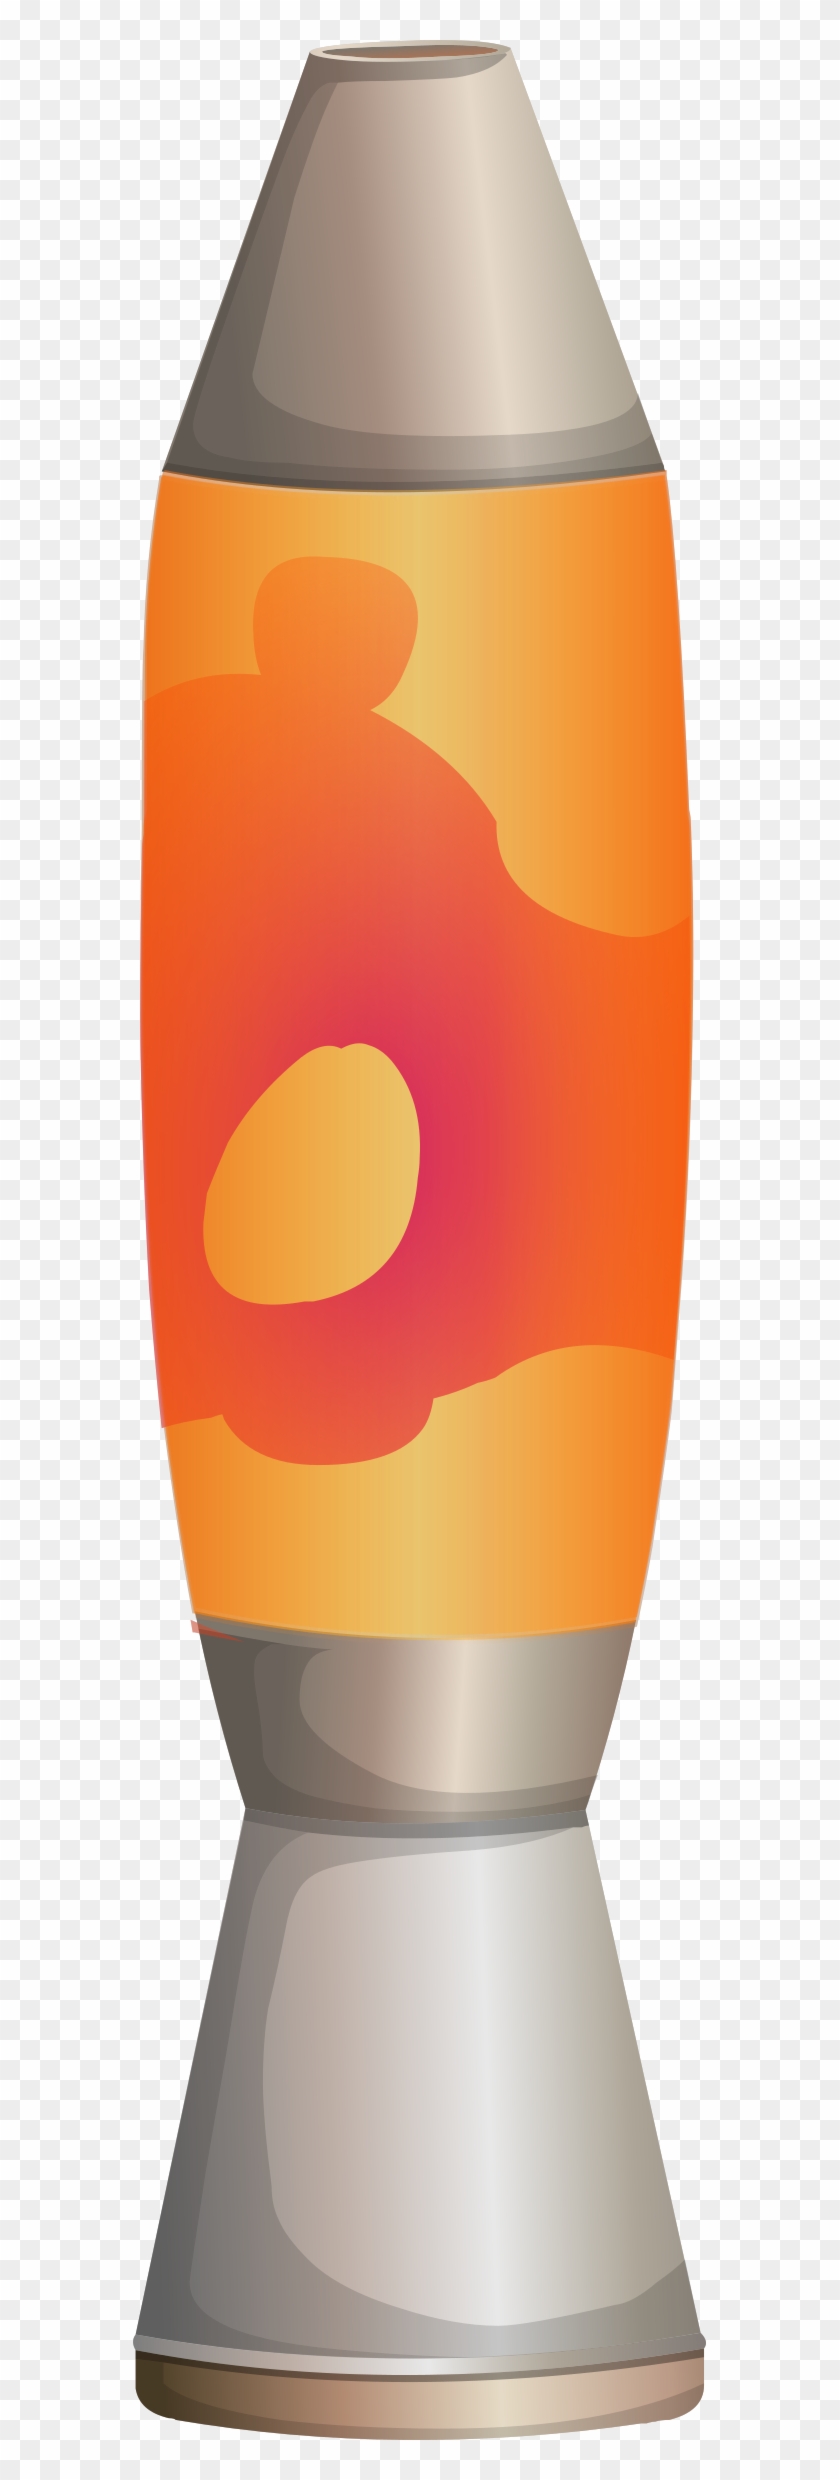 This Free Icons Png Design Of Lava Lamp From Glitch - Lava Lampe Clipart Transparent Png #4652127